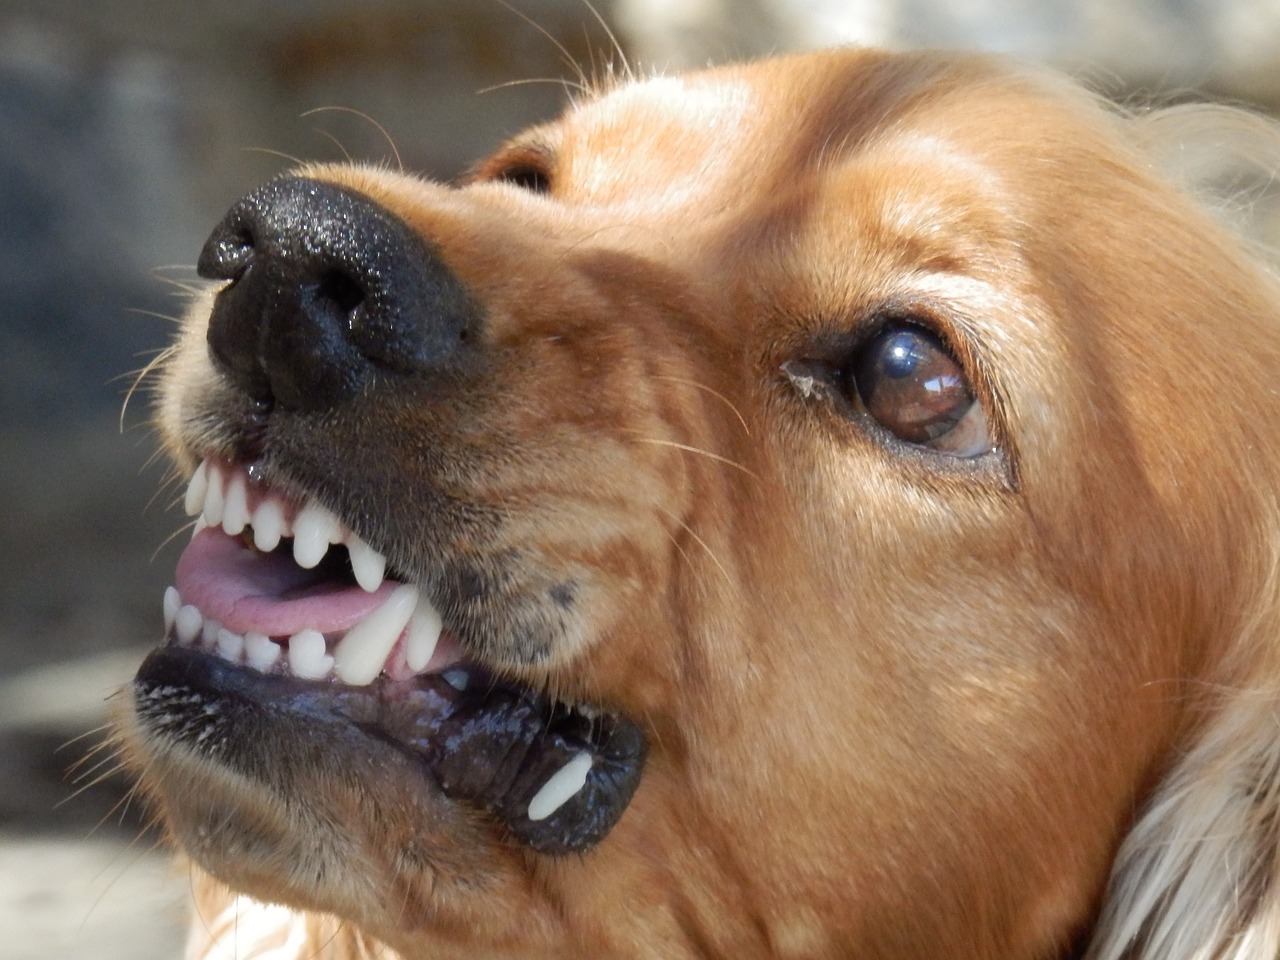 COMMON INJURIES FROM DOG ATTACKS IN TEXAS